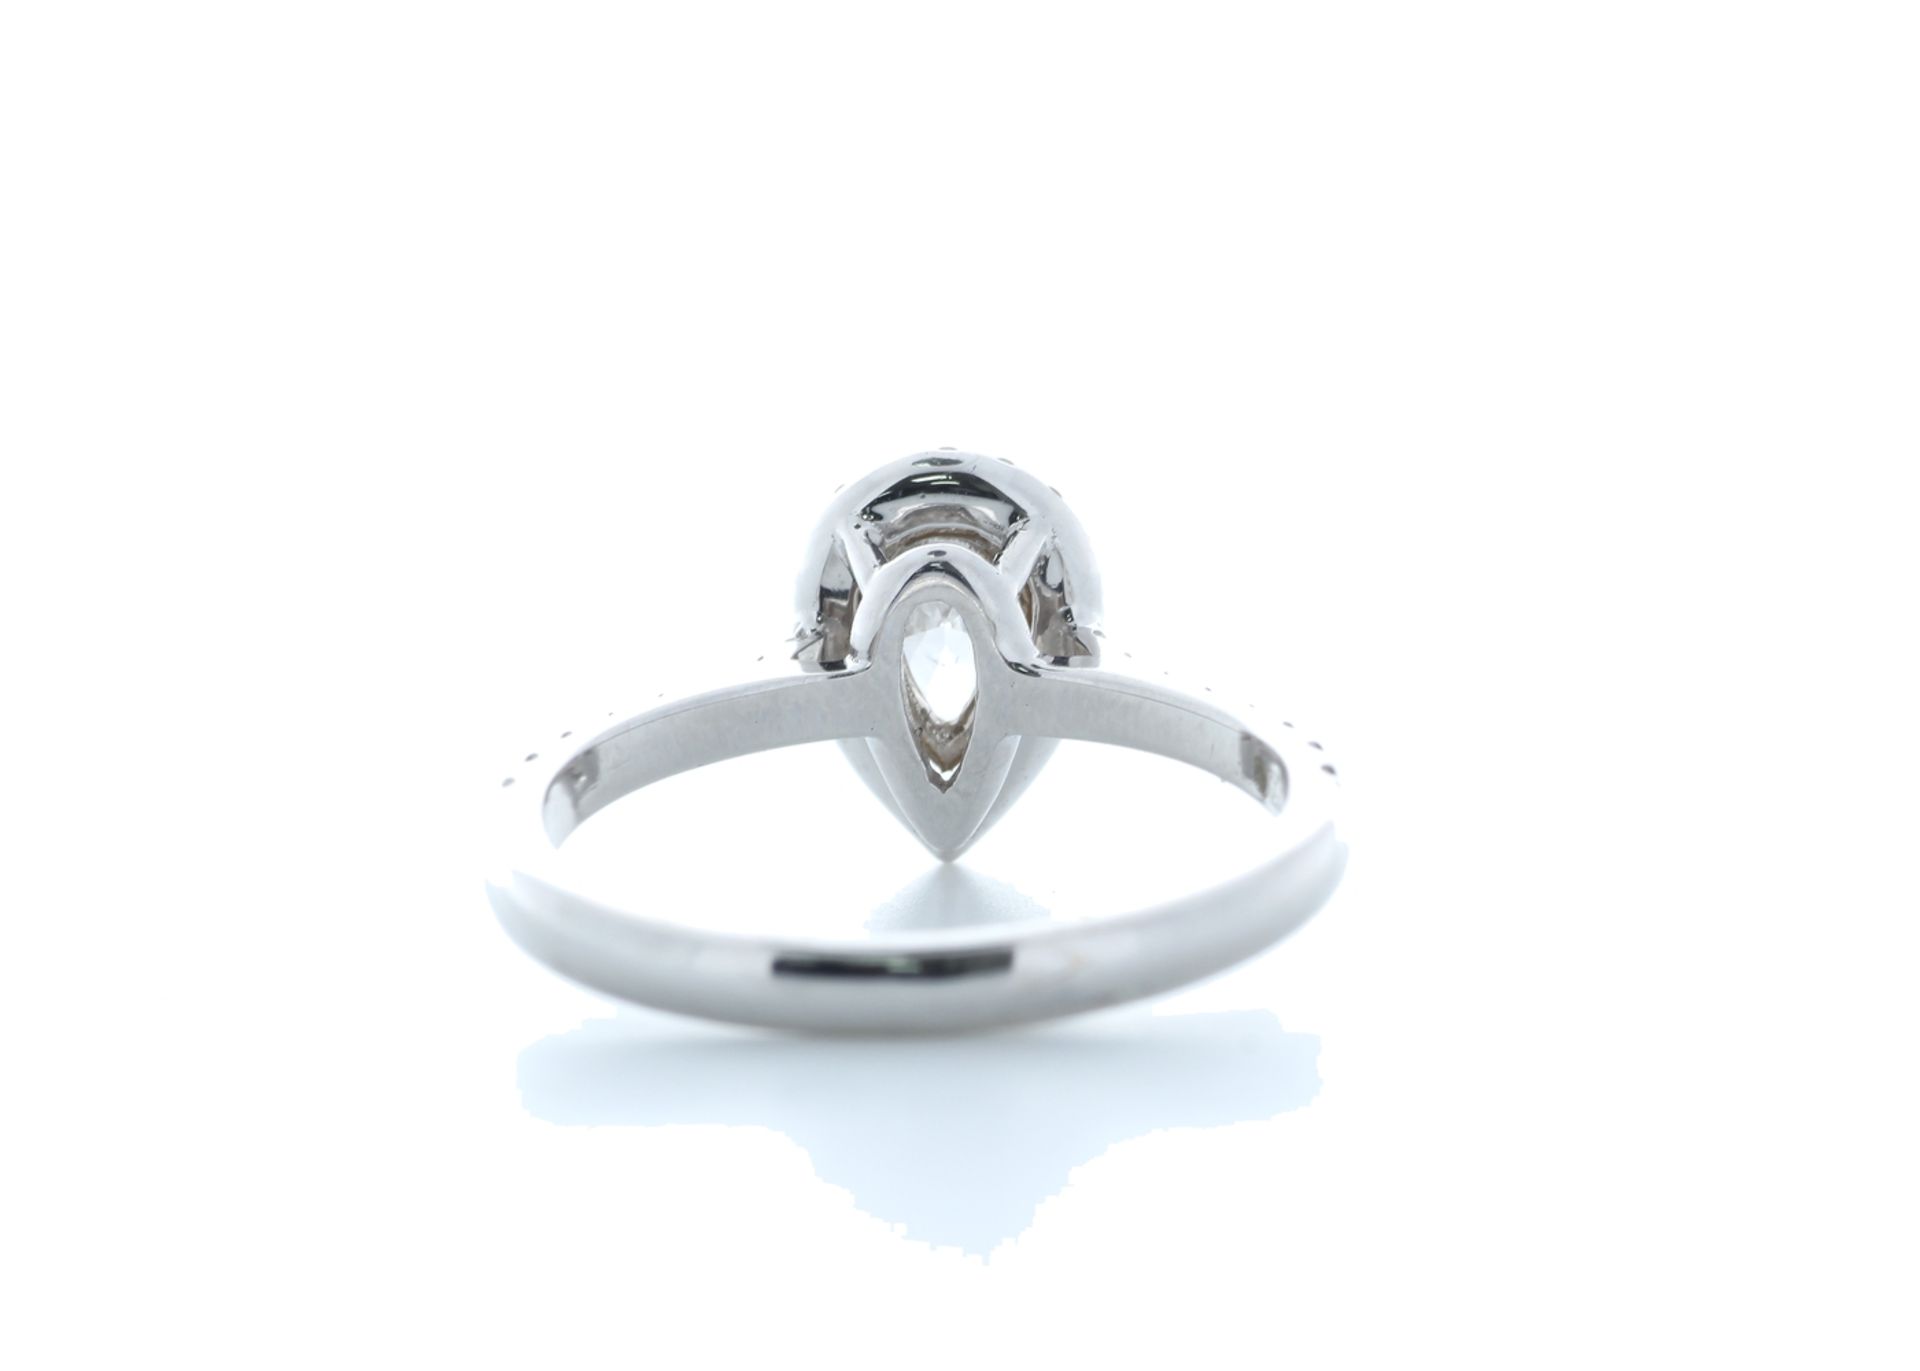 18ct White Gold Single Stone With Halo Setting Ring 0.91 (0.51) Carats - Valued by IDI £6,250.00 - - Image 3 of 5